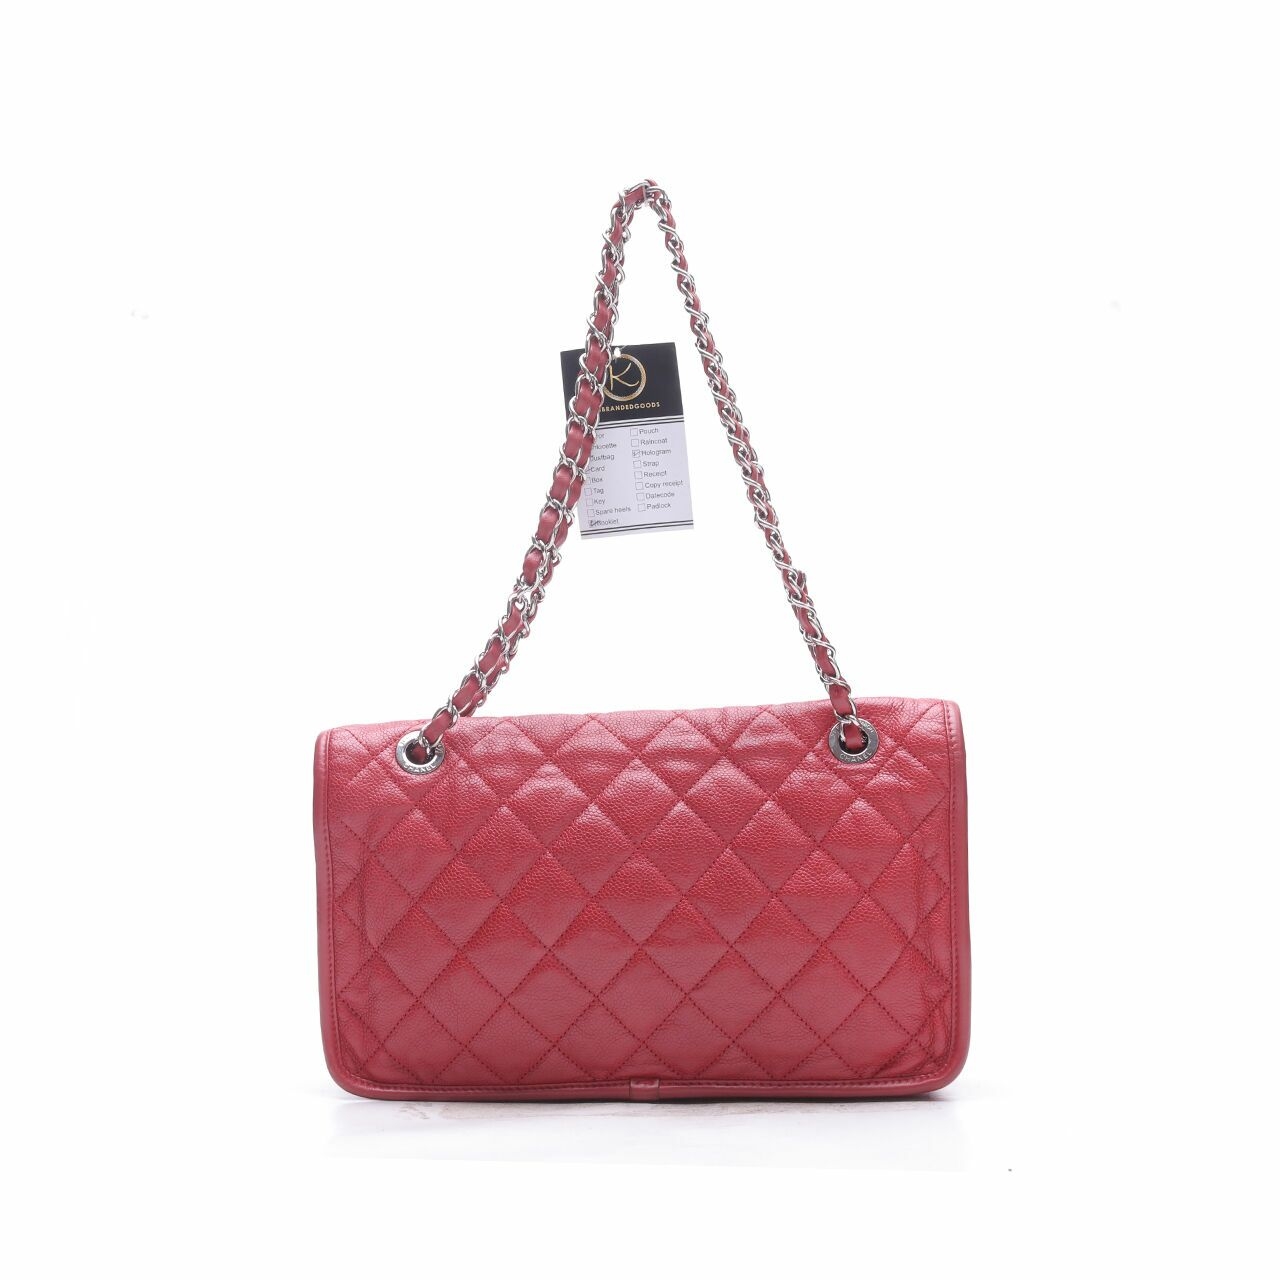 Chanel Caviar Quilted French Riviera Flap Red Shoulder Bag